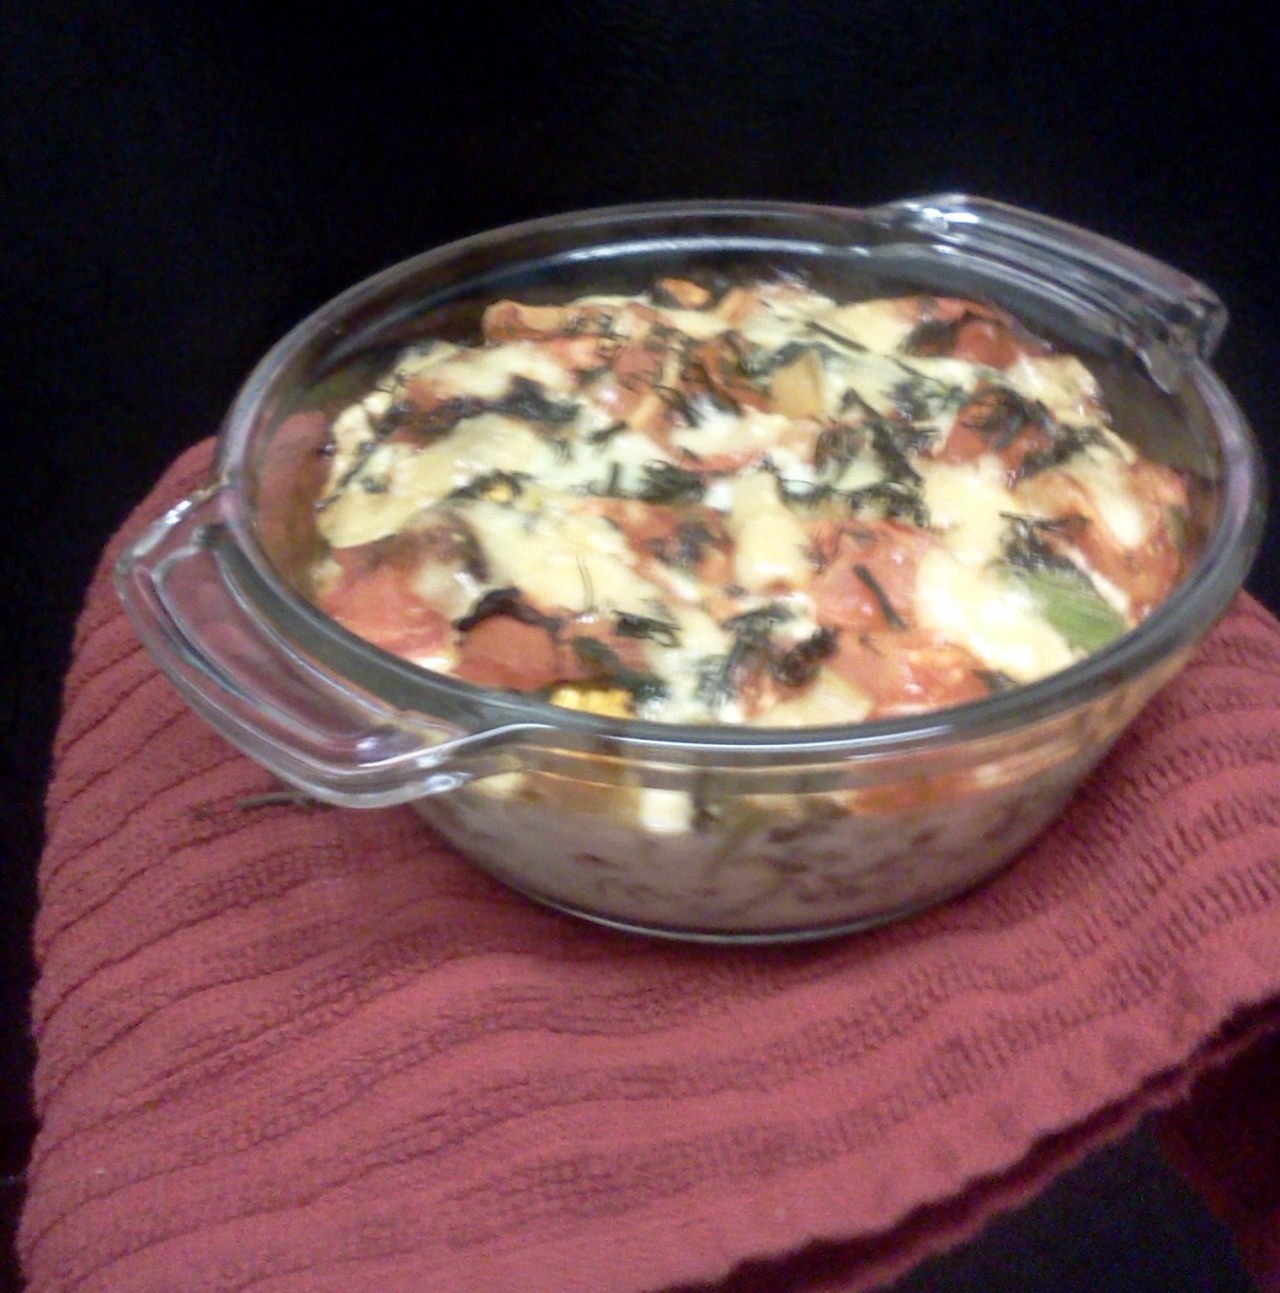 Good morning everyone! this blurry photo is my brunch quiche. i really wanted to